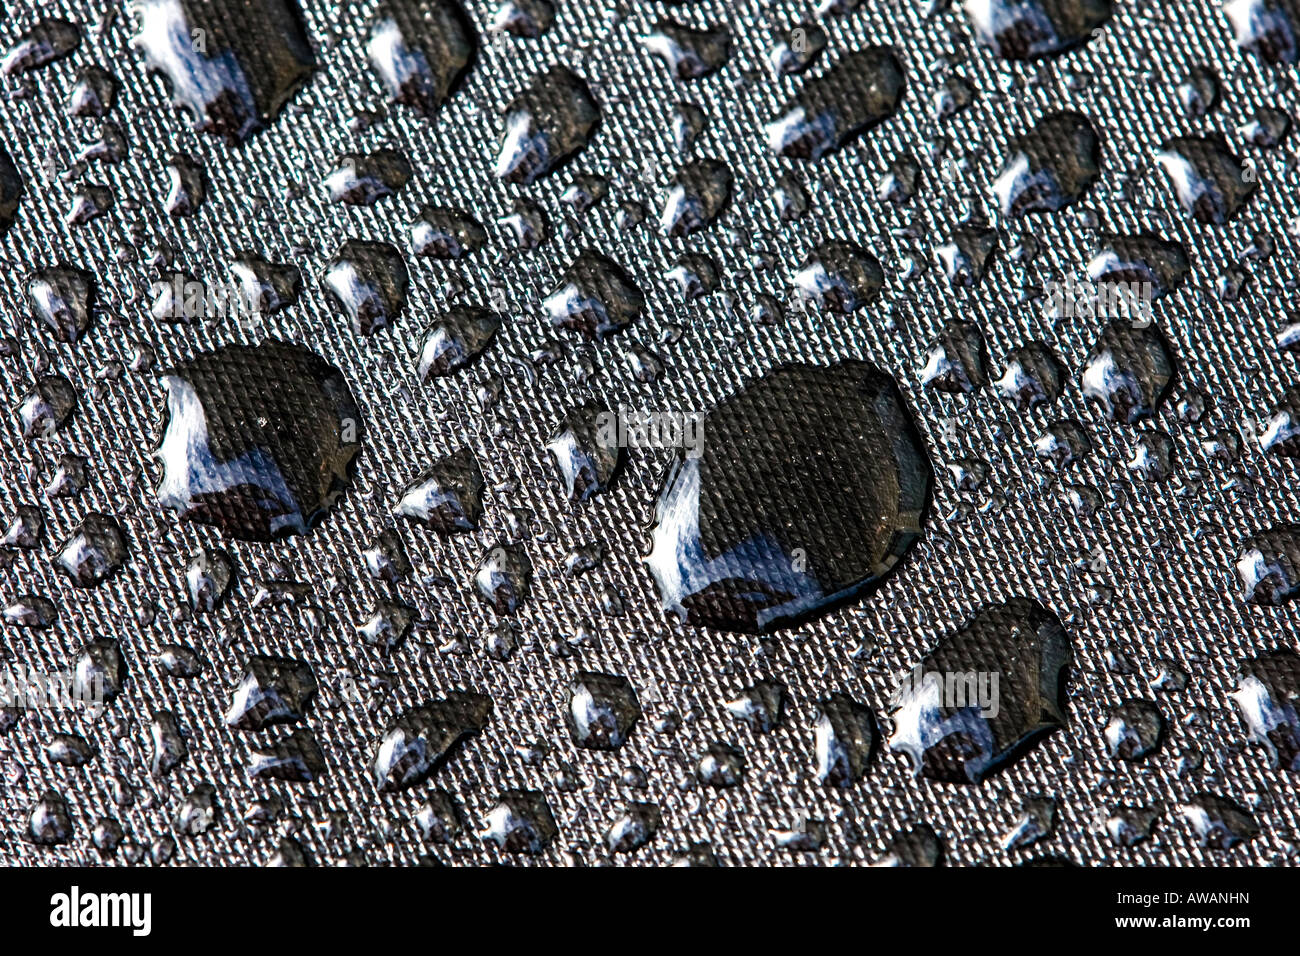 Water drops on fabric Stock Photo